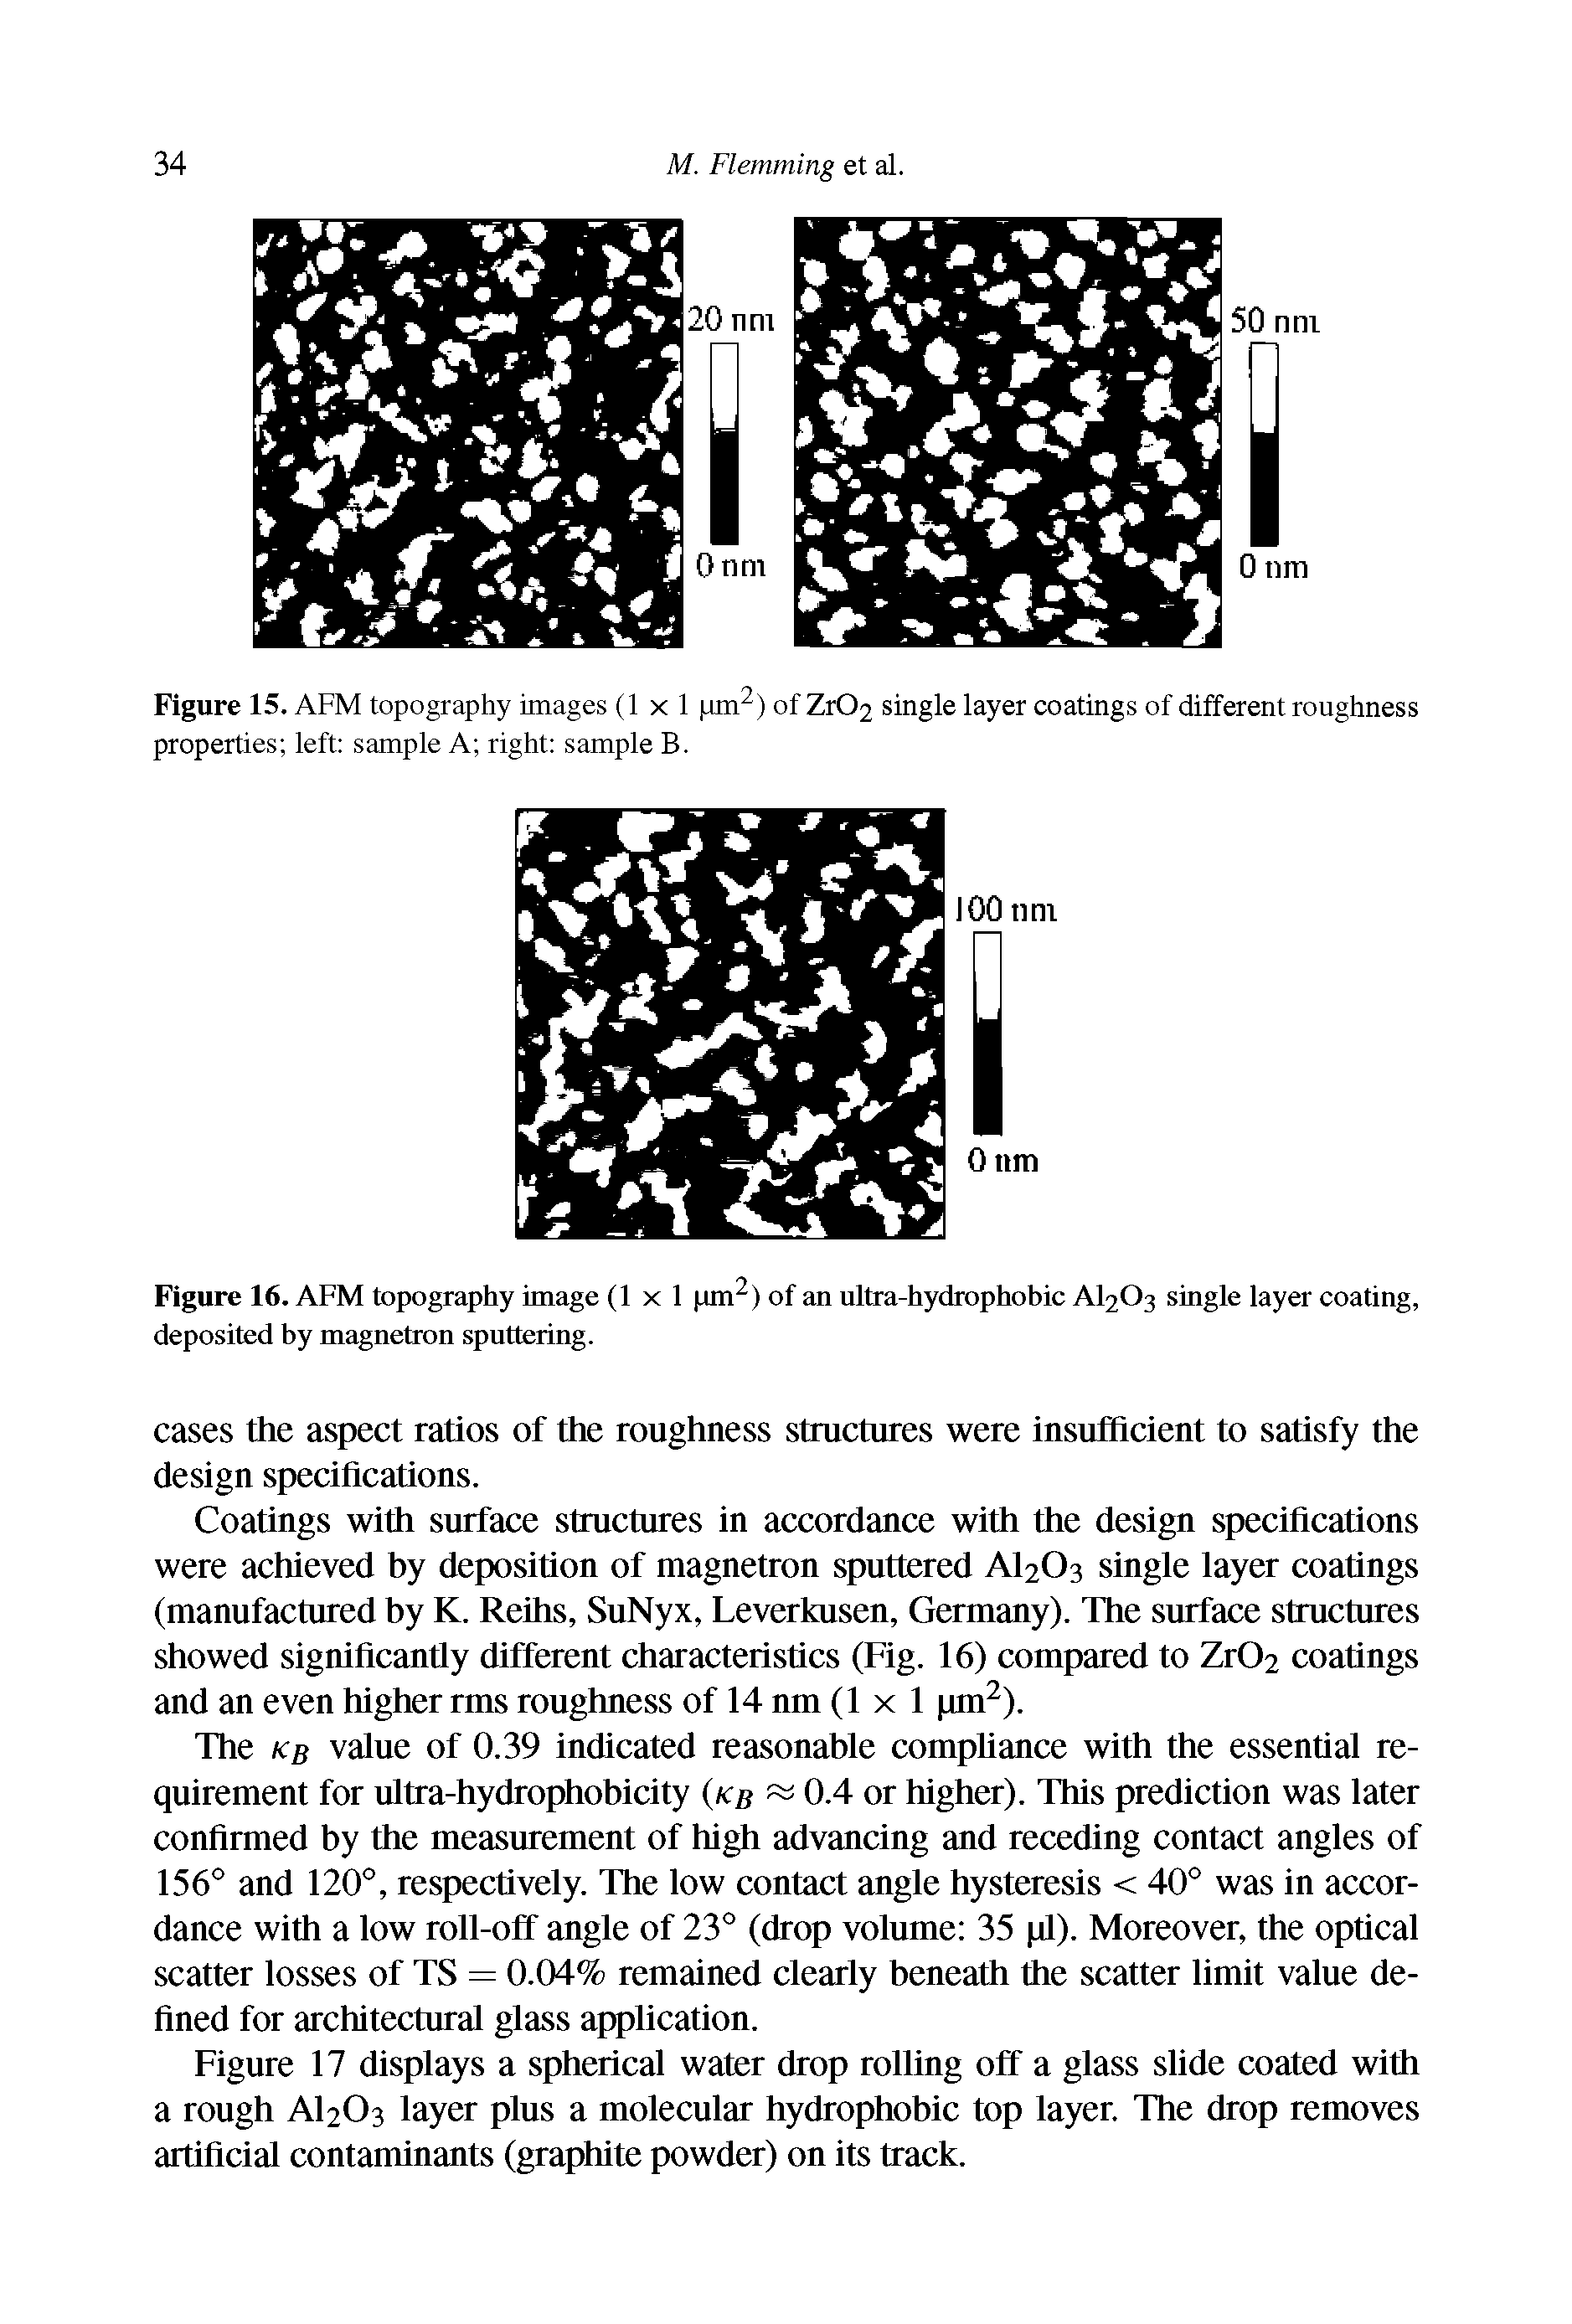 Figure 15. AFM topography images (1x1 jm ) of Zr02 single layer coatings of different roughness properties left sample A right sample B.